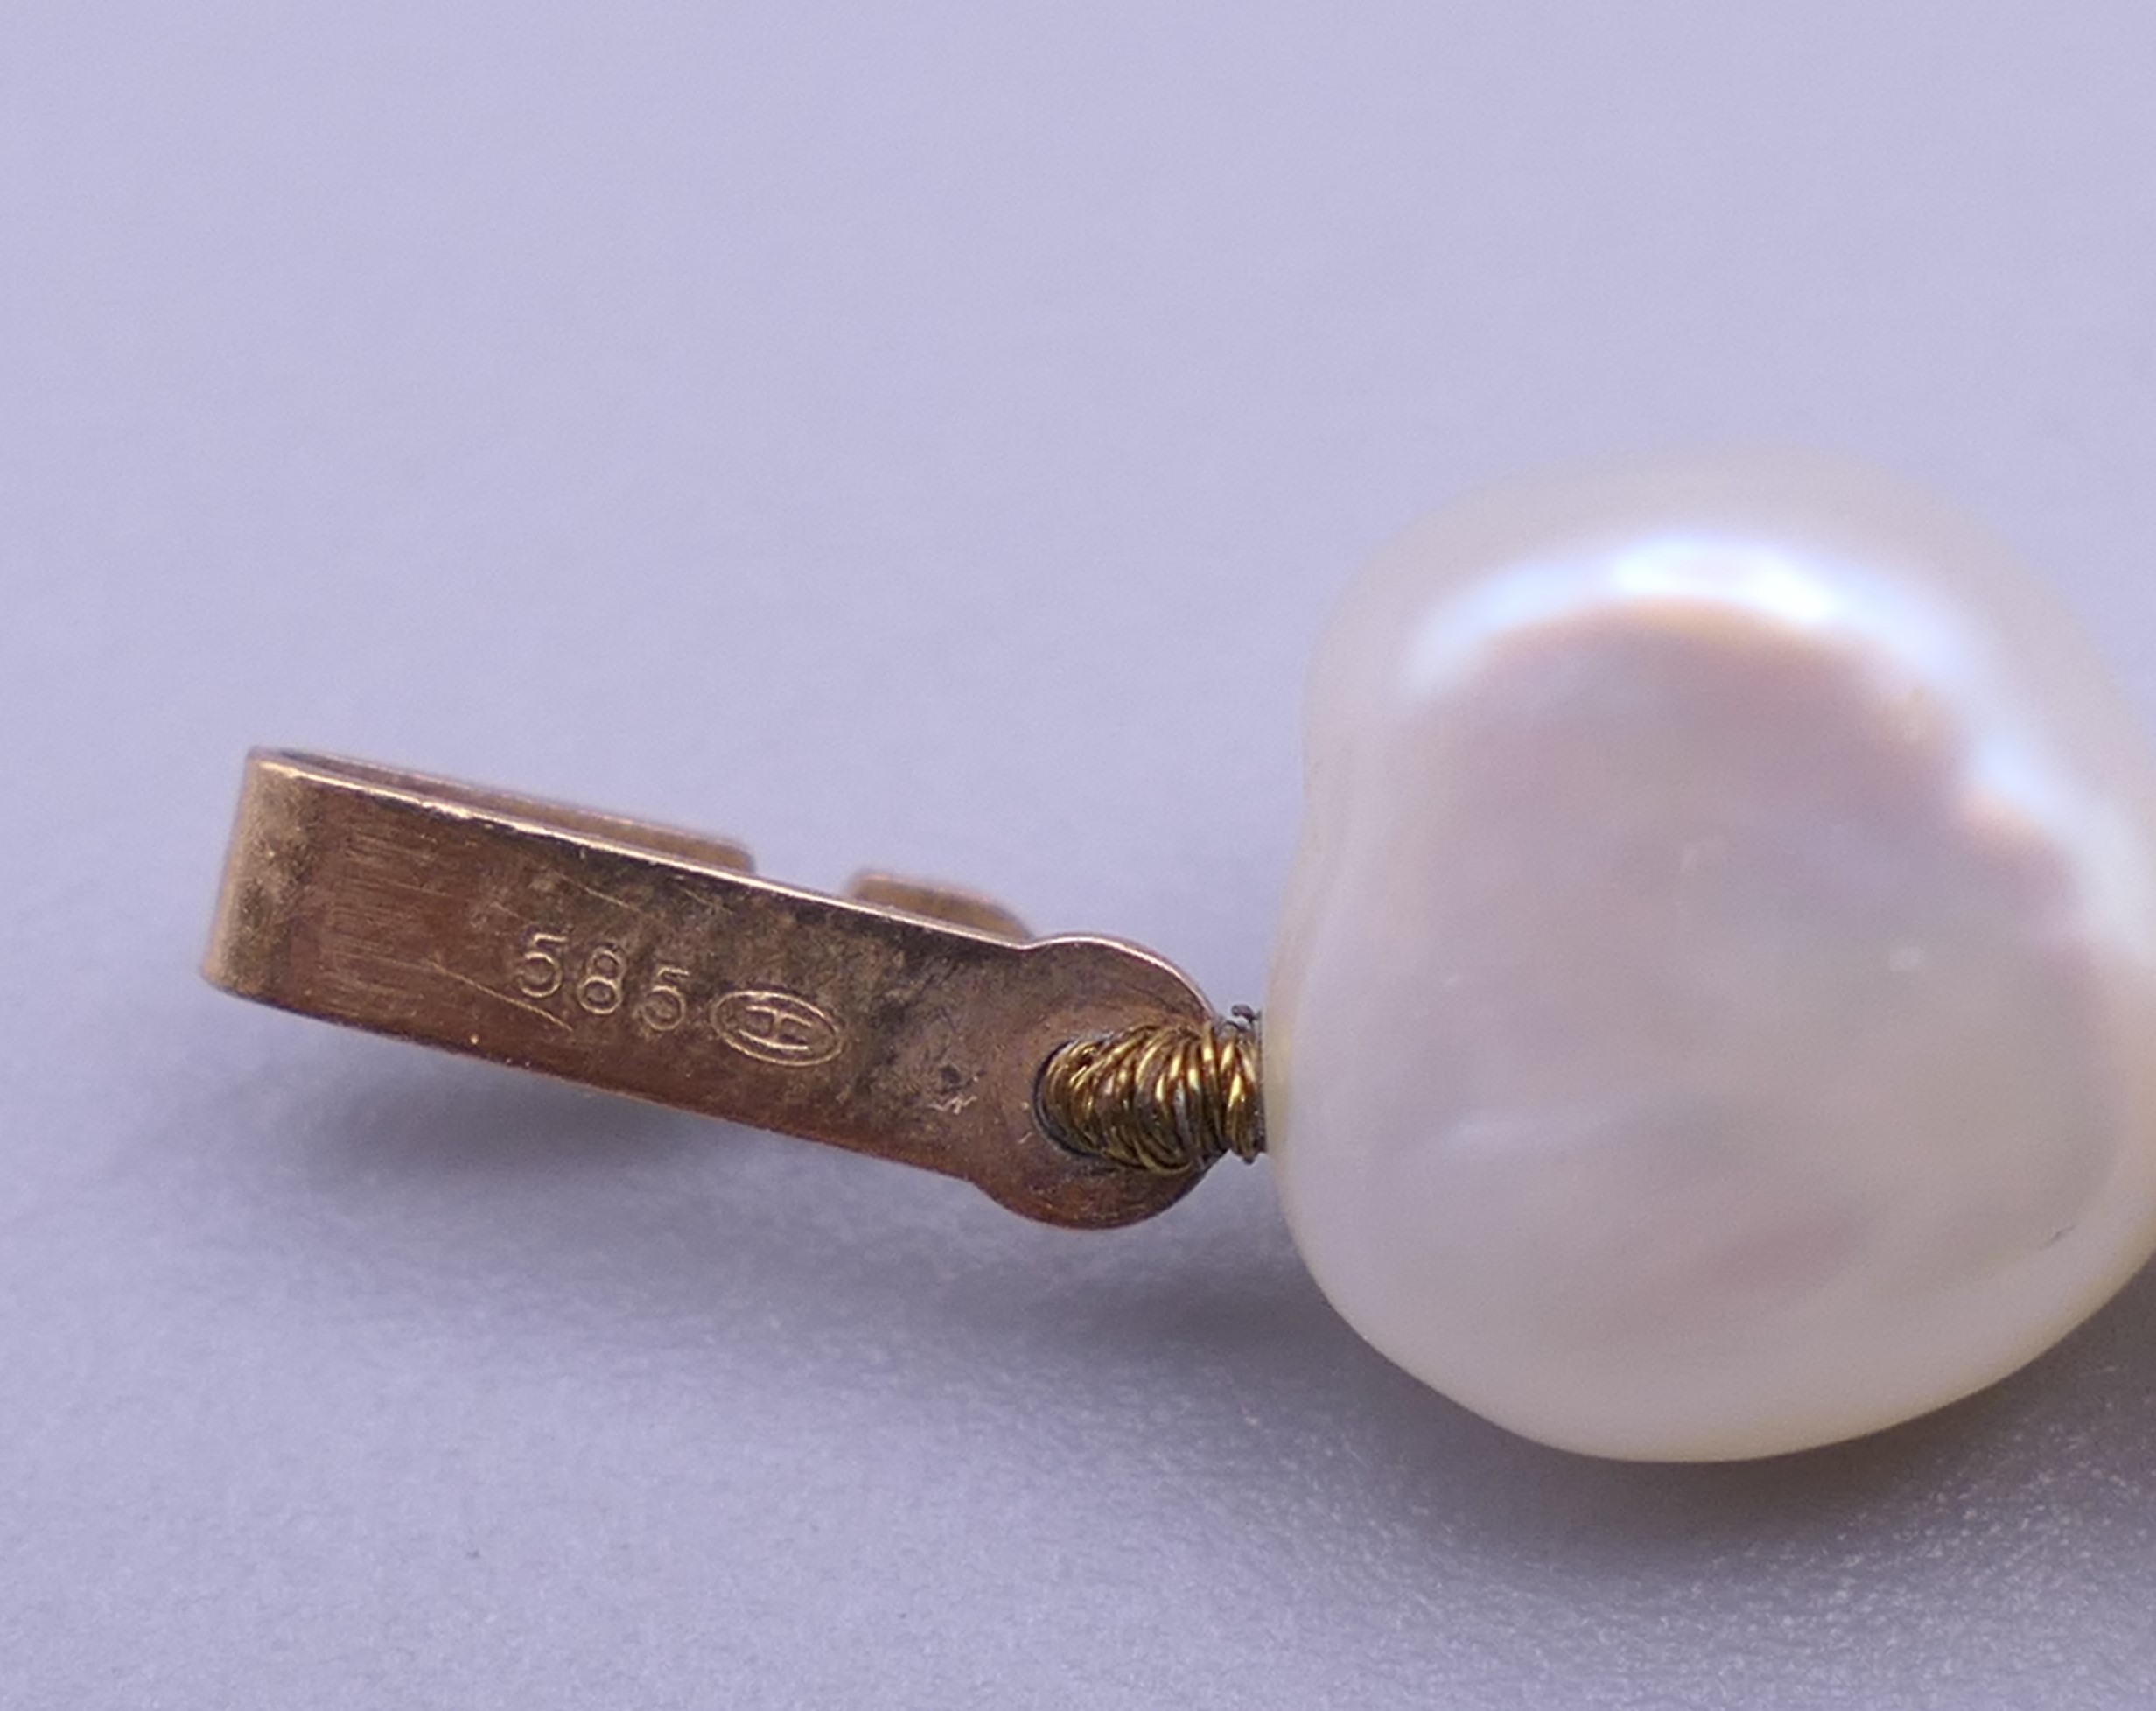 A pearl necklace with a 14 ct gold clasp - Image 6 of 7